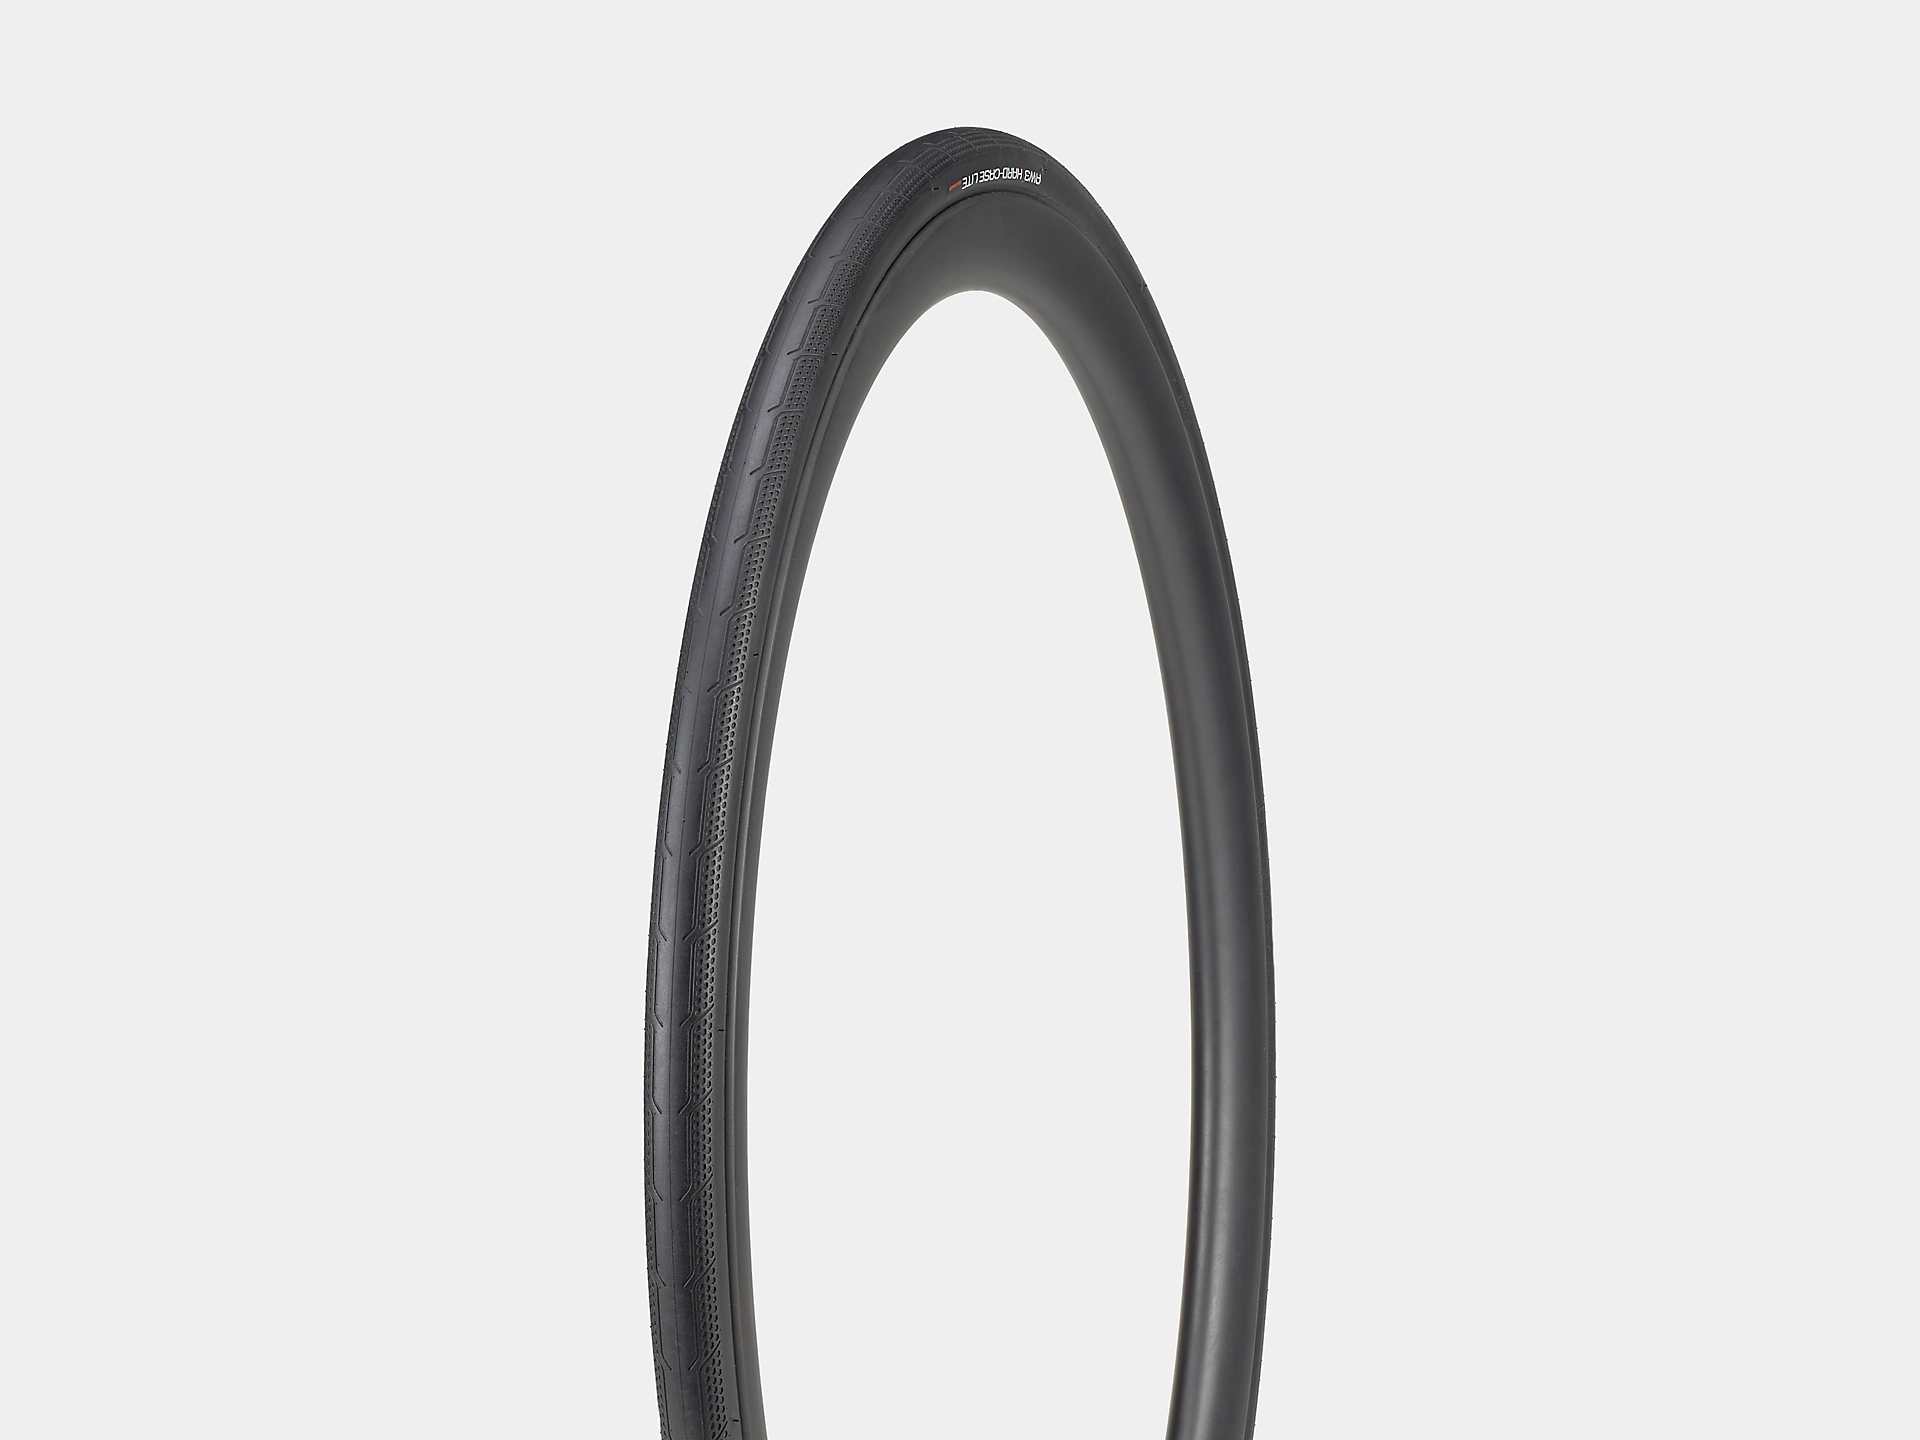 AW3 HARD-CASE LITE ROAD TIRE